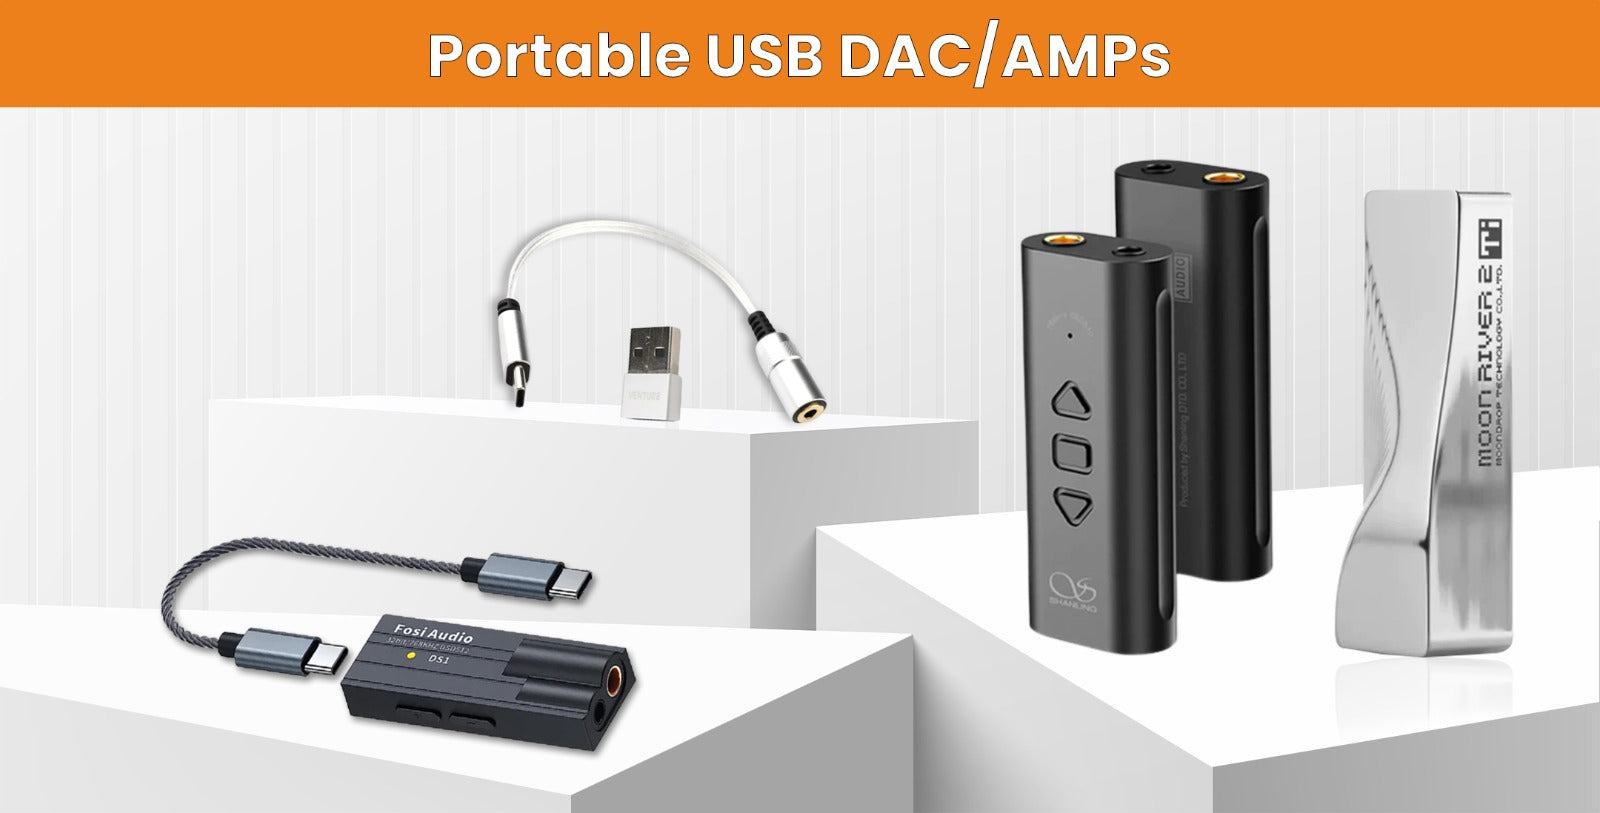 Best Portable USB DAC/AMPs: Top Choices Across Price Ranges